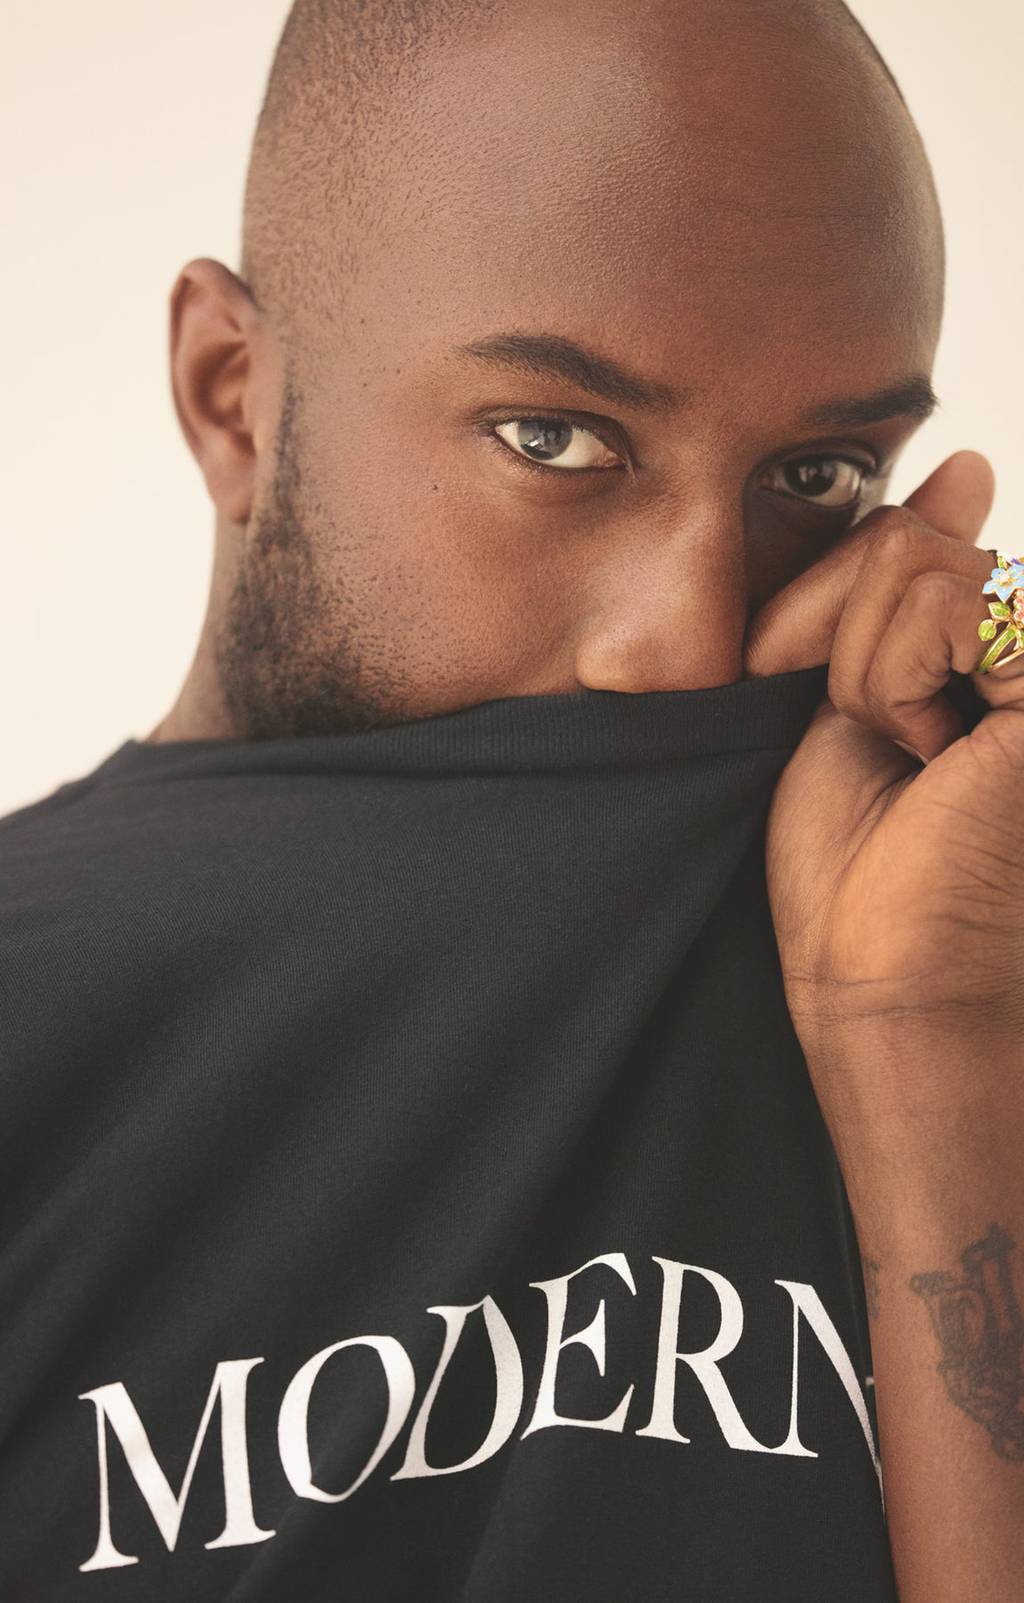 Virgil Abloh, the founder of streetwear label Off-White and the new artistic director for Louis Vuitton Menswear.